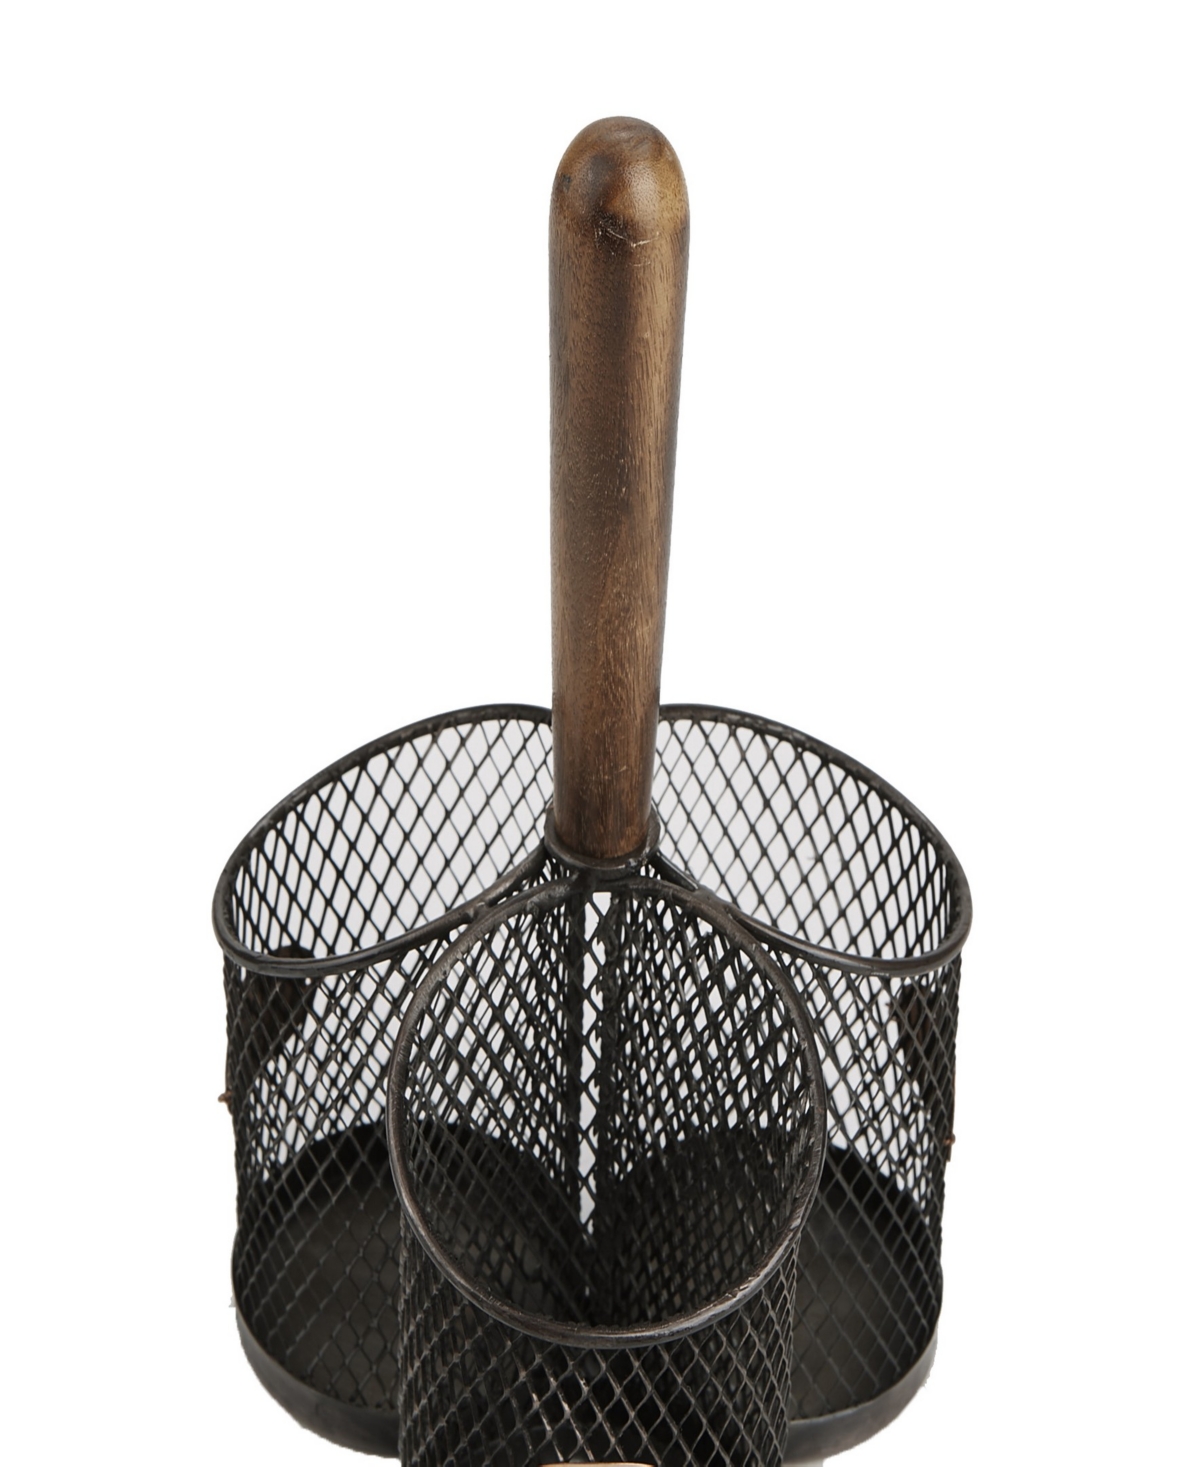 Wood 3 Section Utensil Caddy - Brown